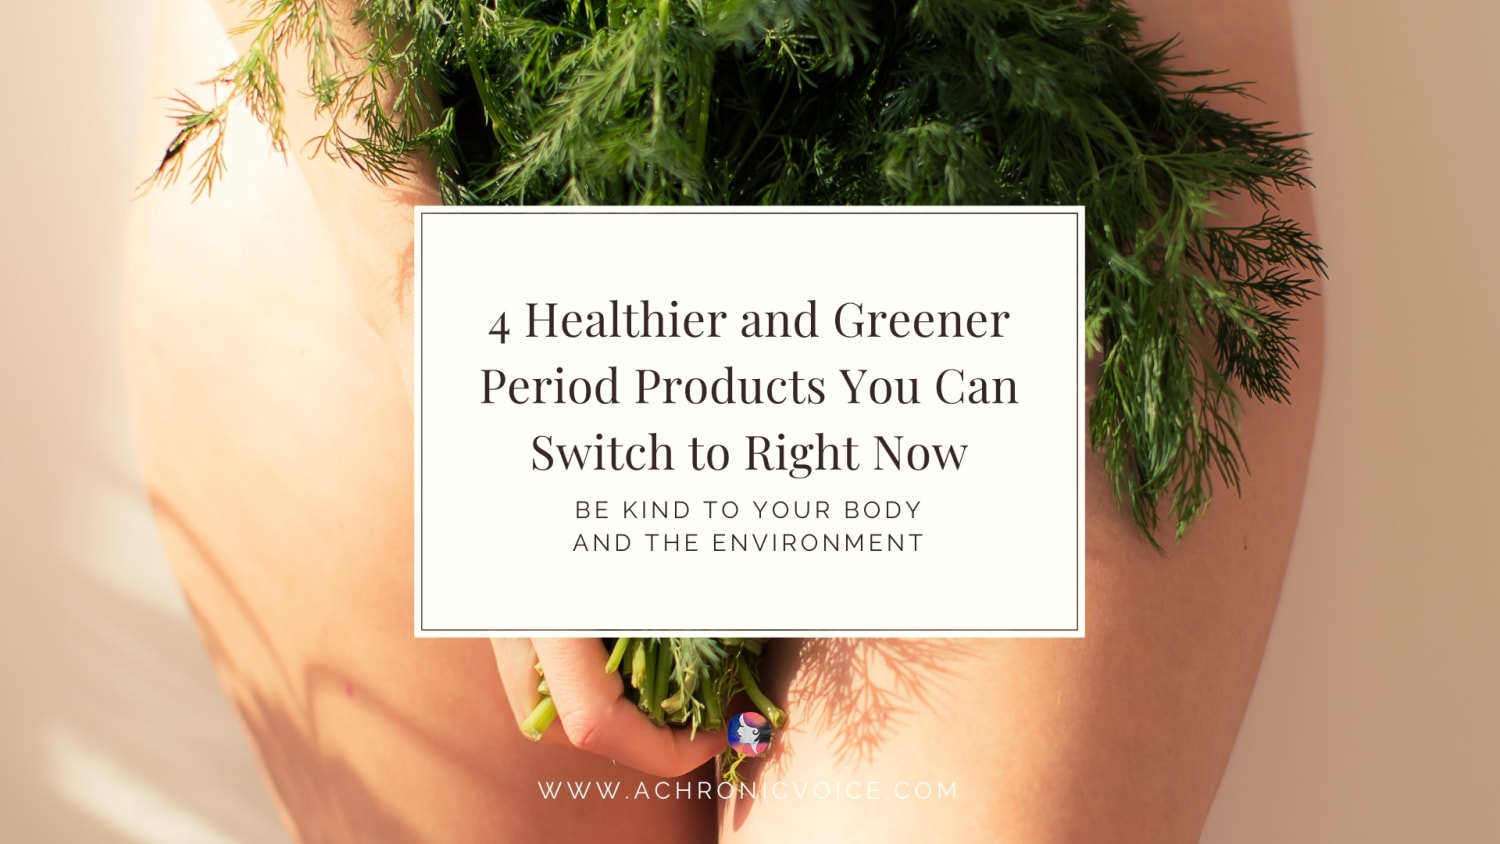 4 Healthier and Greener Period Products You Can Switch to Right Now